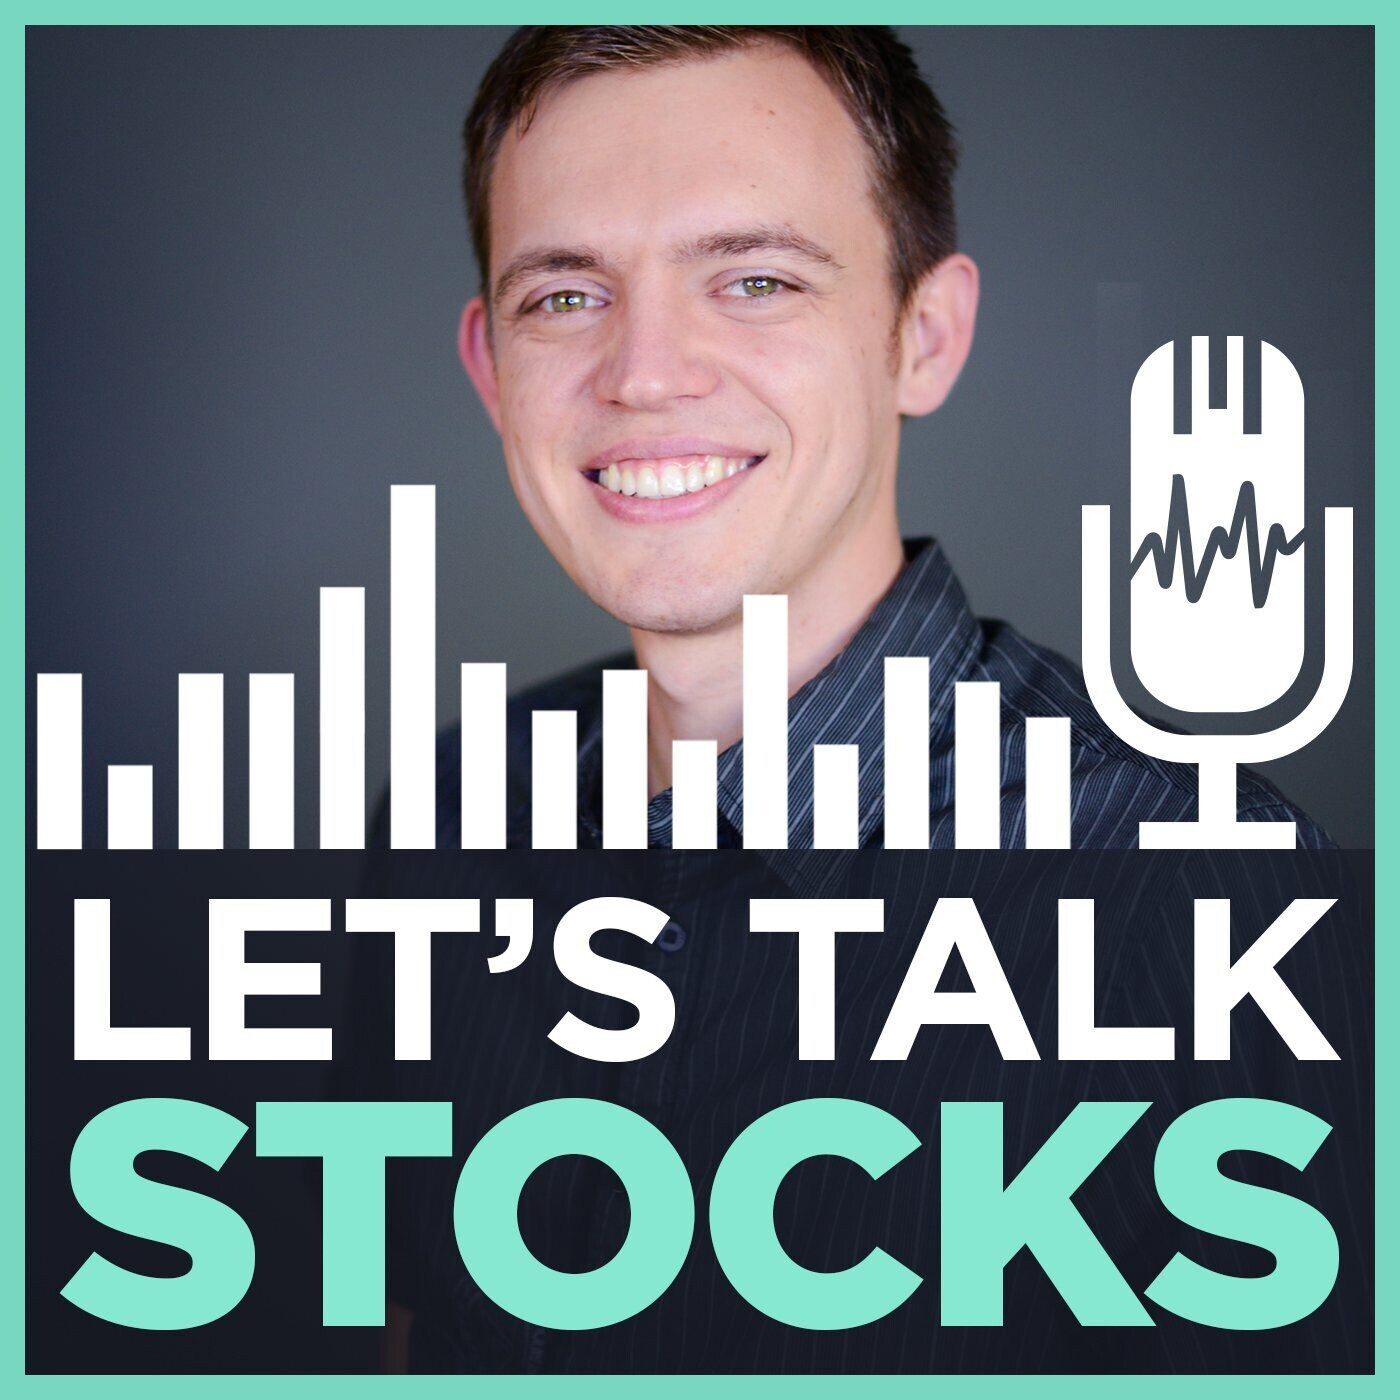 How Long Does it Take to Make a Million Dollars ($1M) in the Stock Market? Ep 239